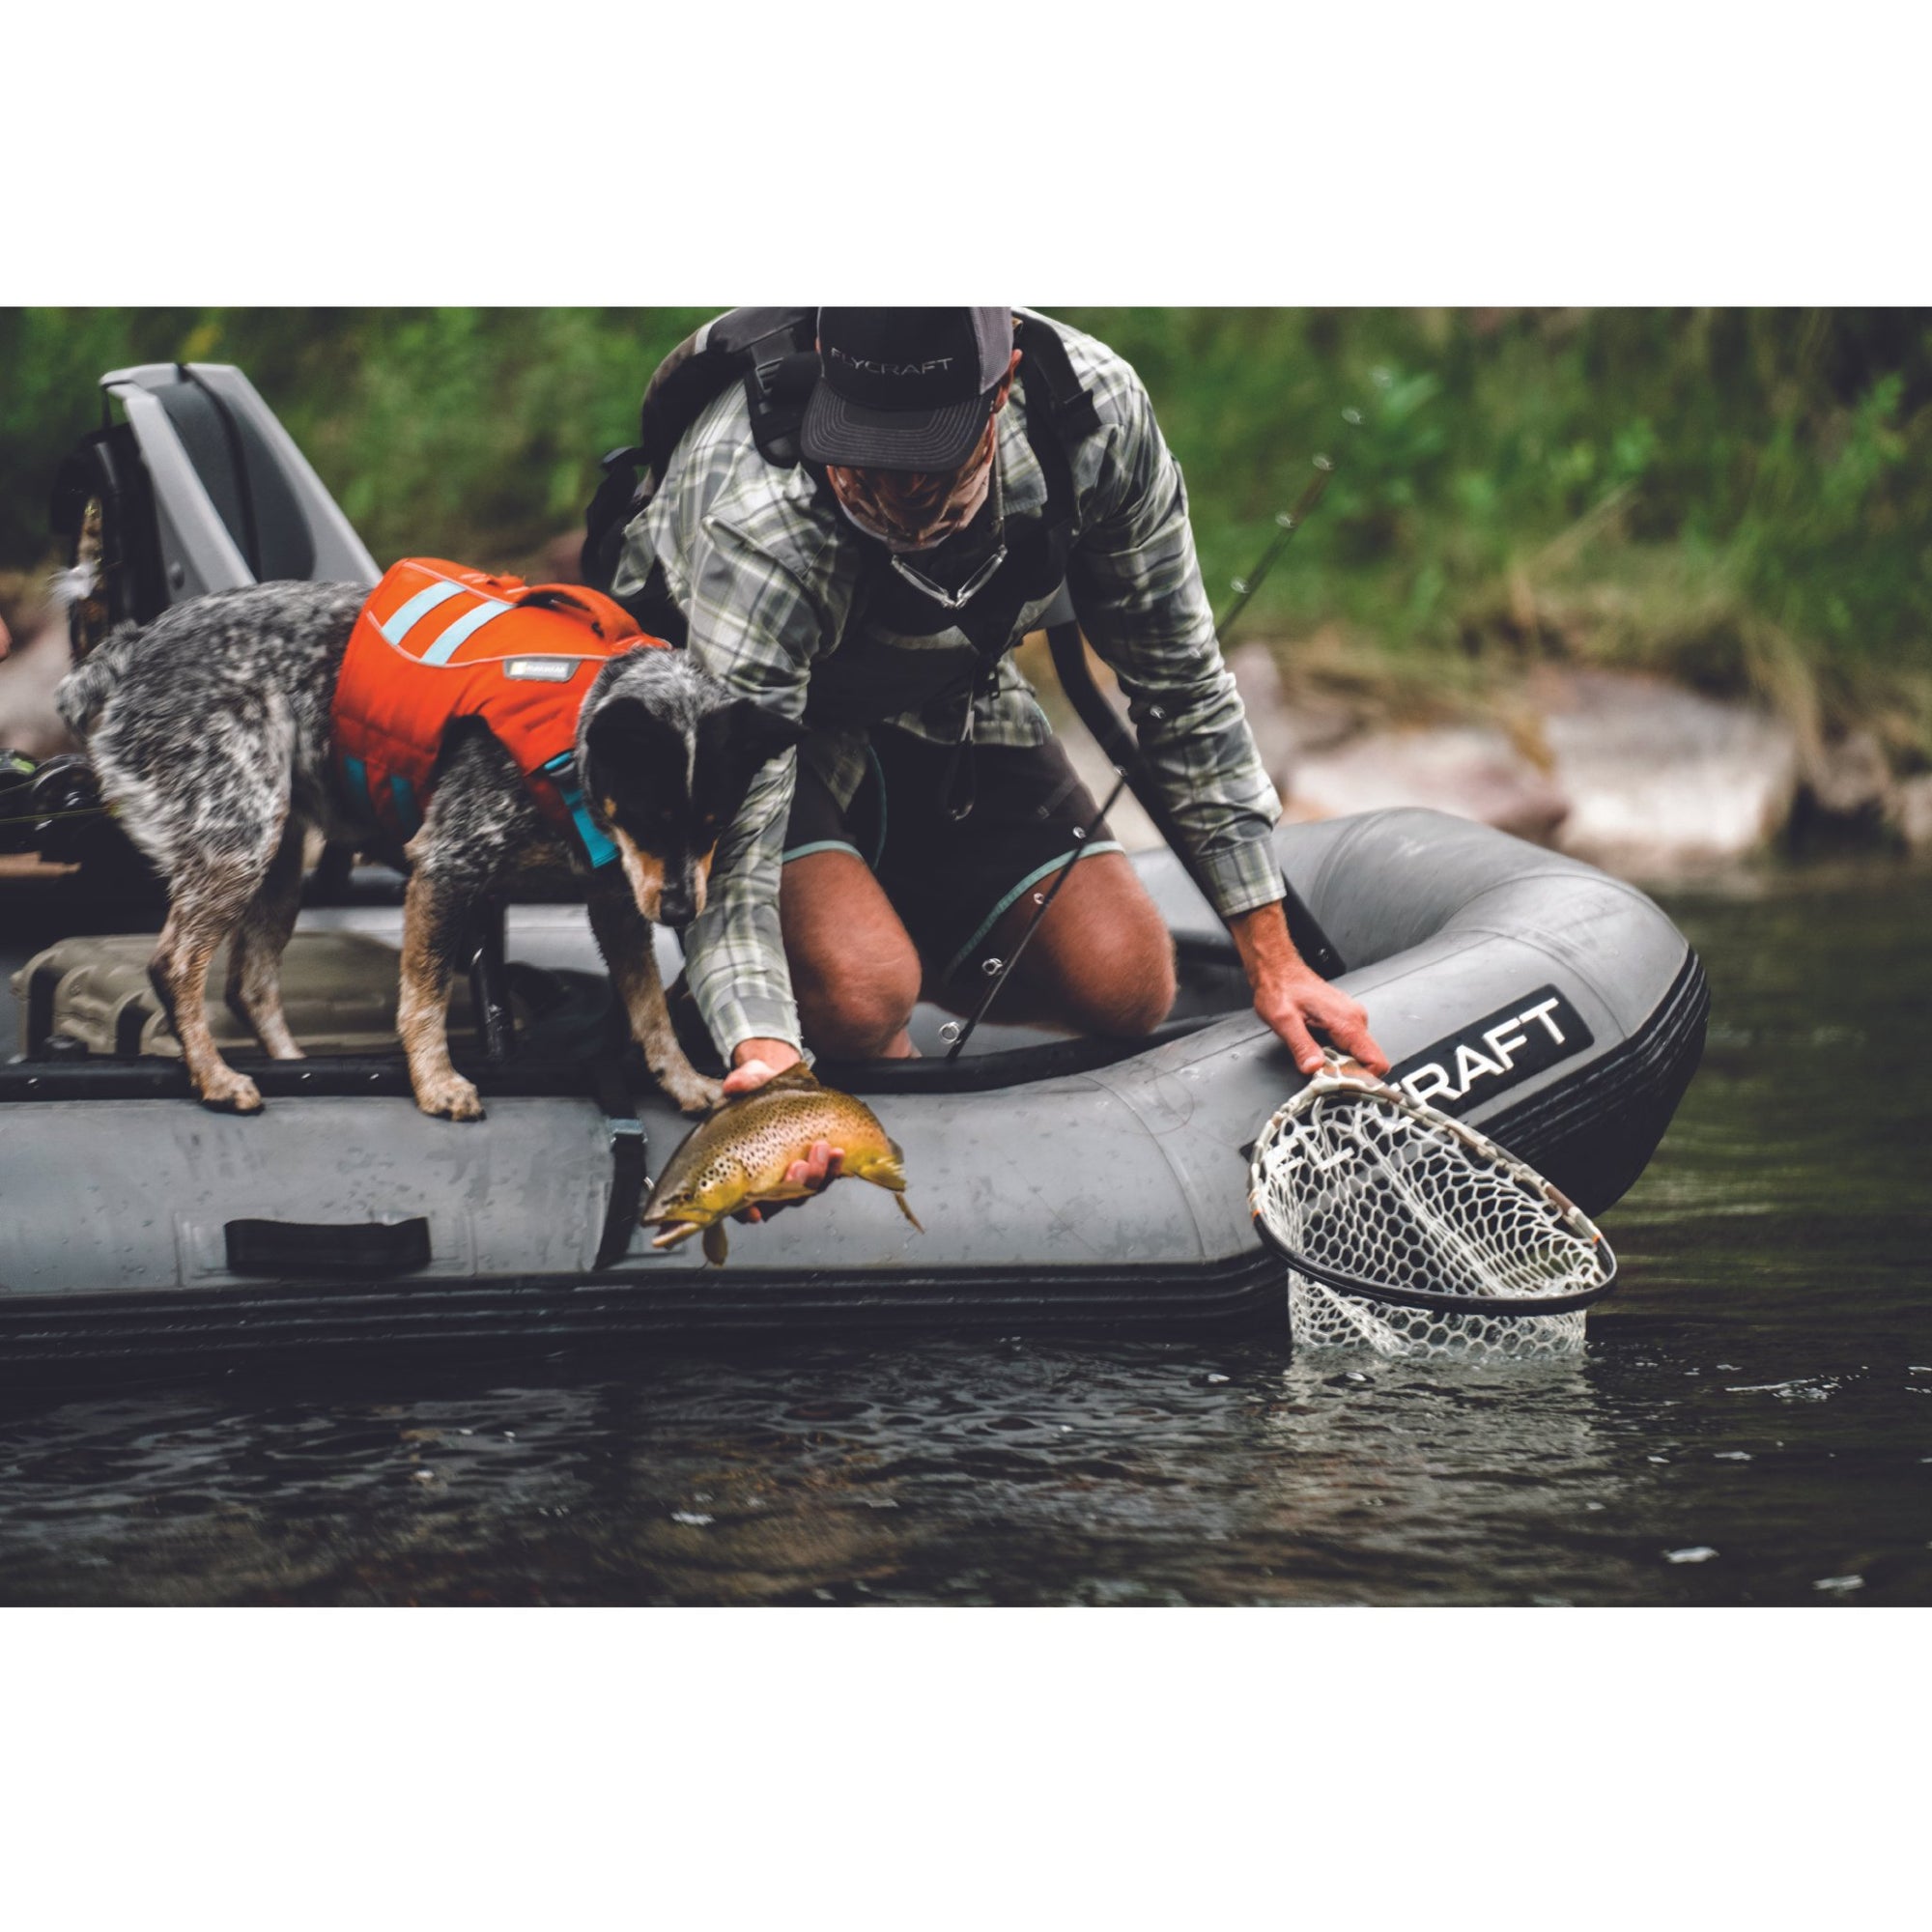 Flycraft’s Inflatable Fishing Boat: X Pro Package (2 or 3-Man)